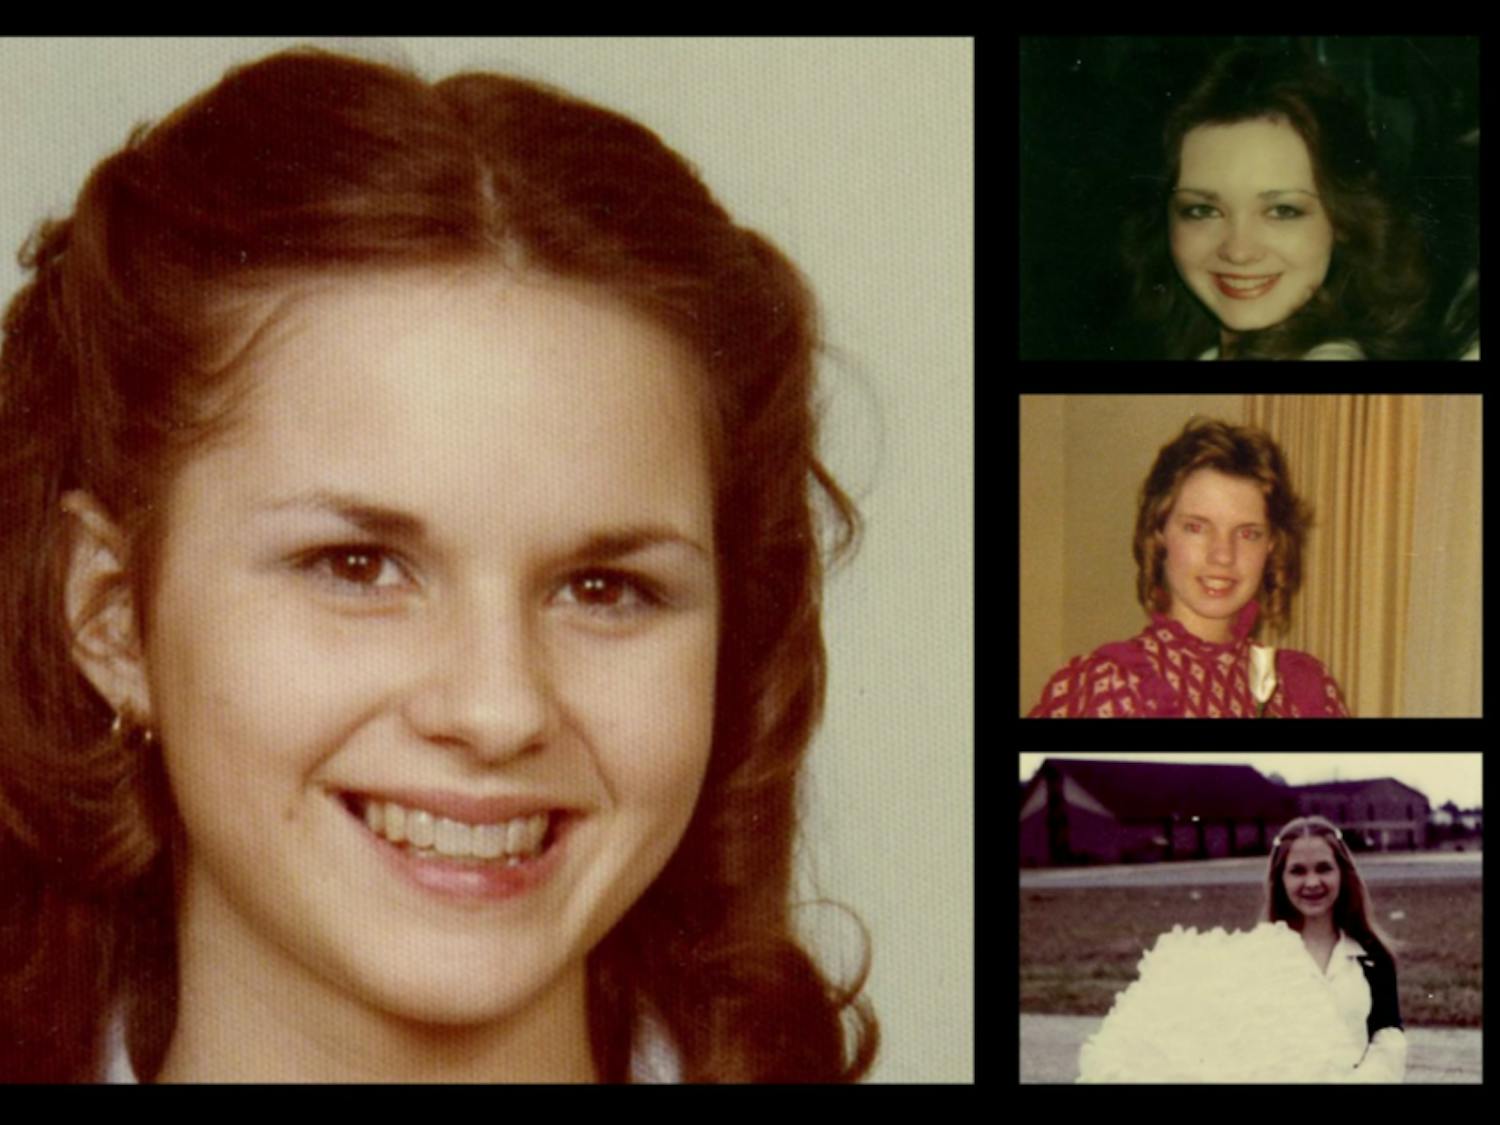 Leigh Corfman, left, in a photo from 1979, when she was about 14. At right, from top, Wendy Miller around age 16, Debbie Wesson Gibson around age 17 and Gloria Thacker Deason around age 18. All are women who accused Moore of pursuing them when they were between the ages of 14-18. He was in his early 30s.